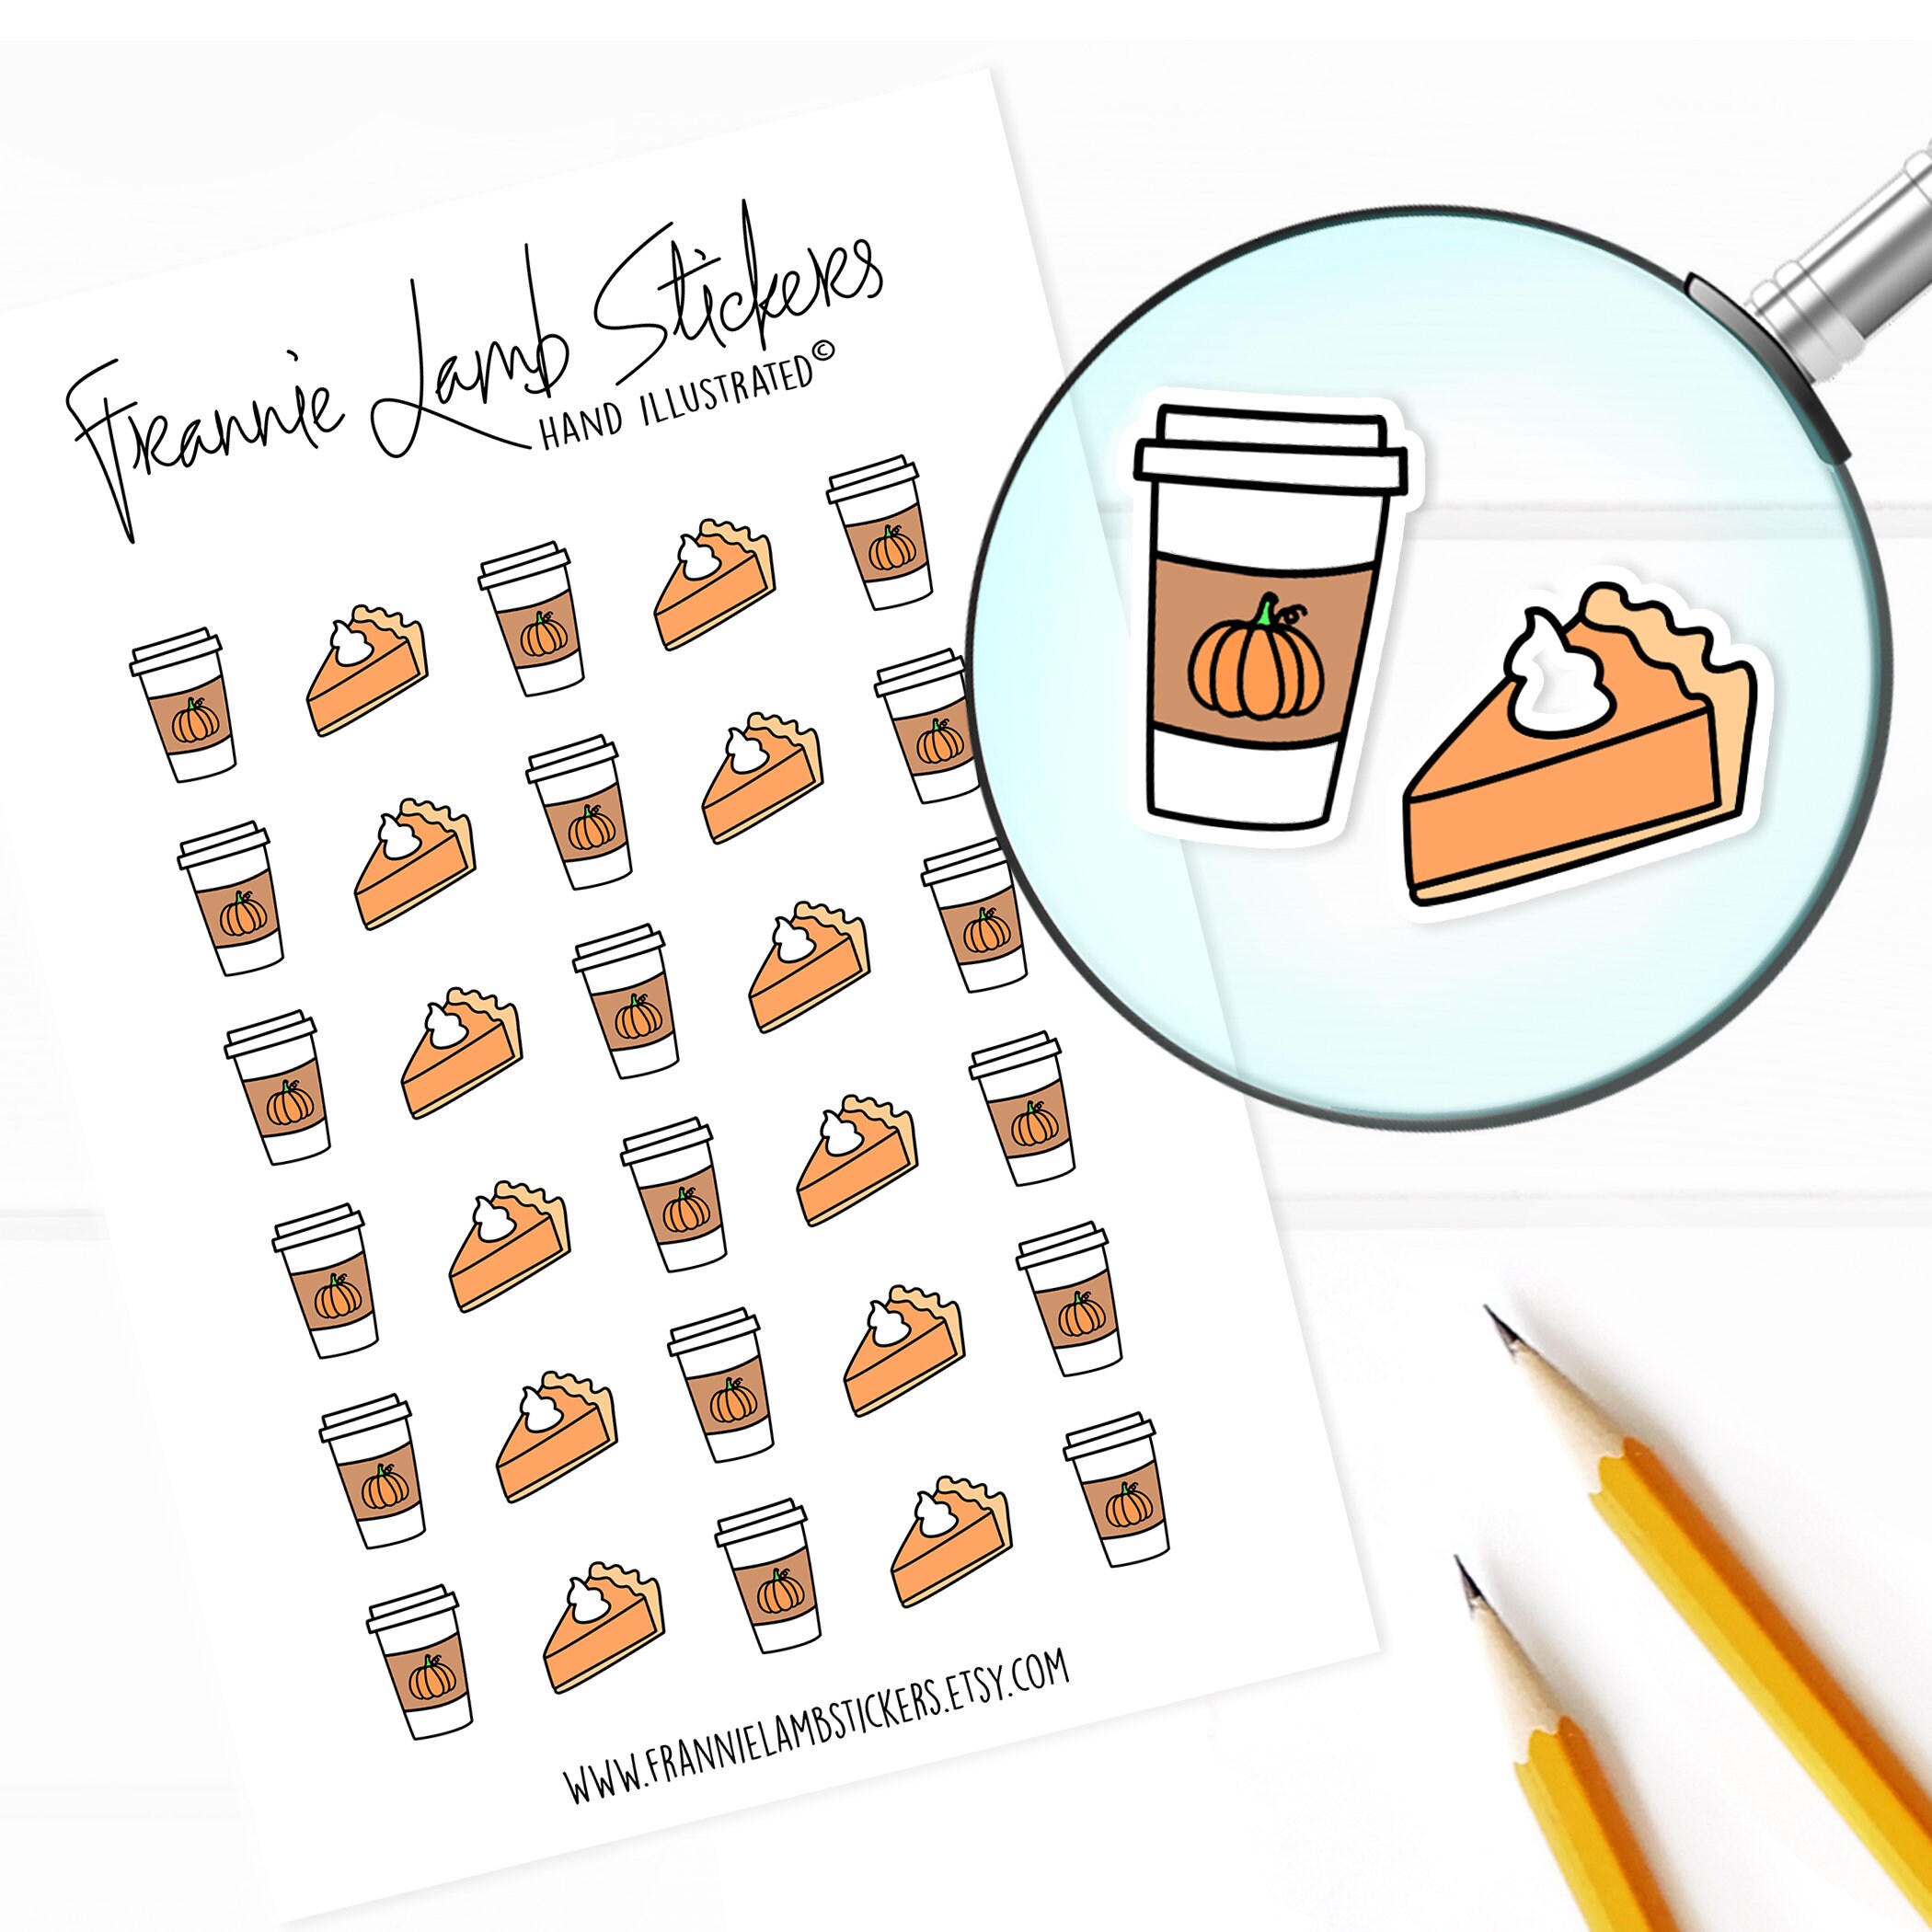 Coffee Time Stickers Sheet. Planner Stickers for College Planners